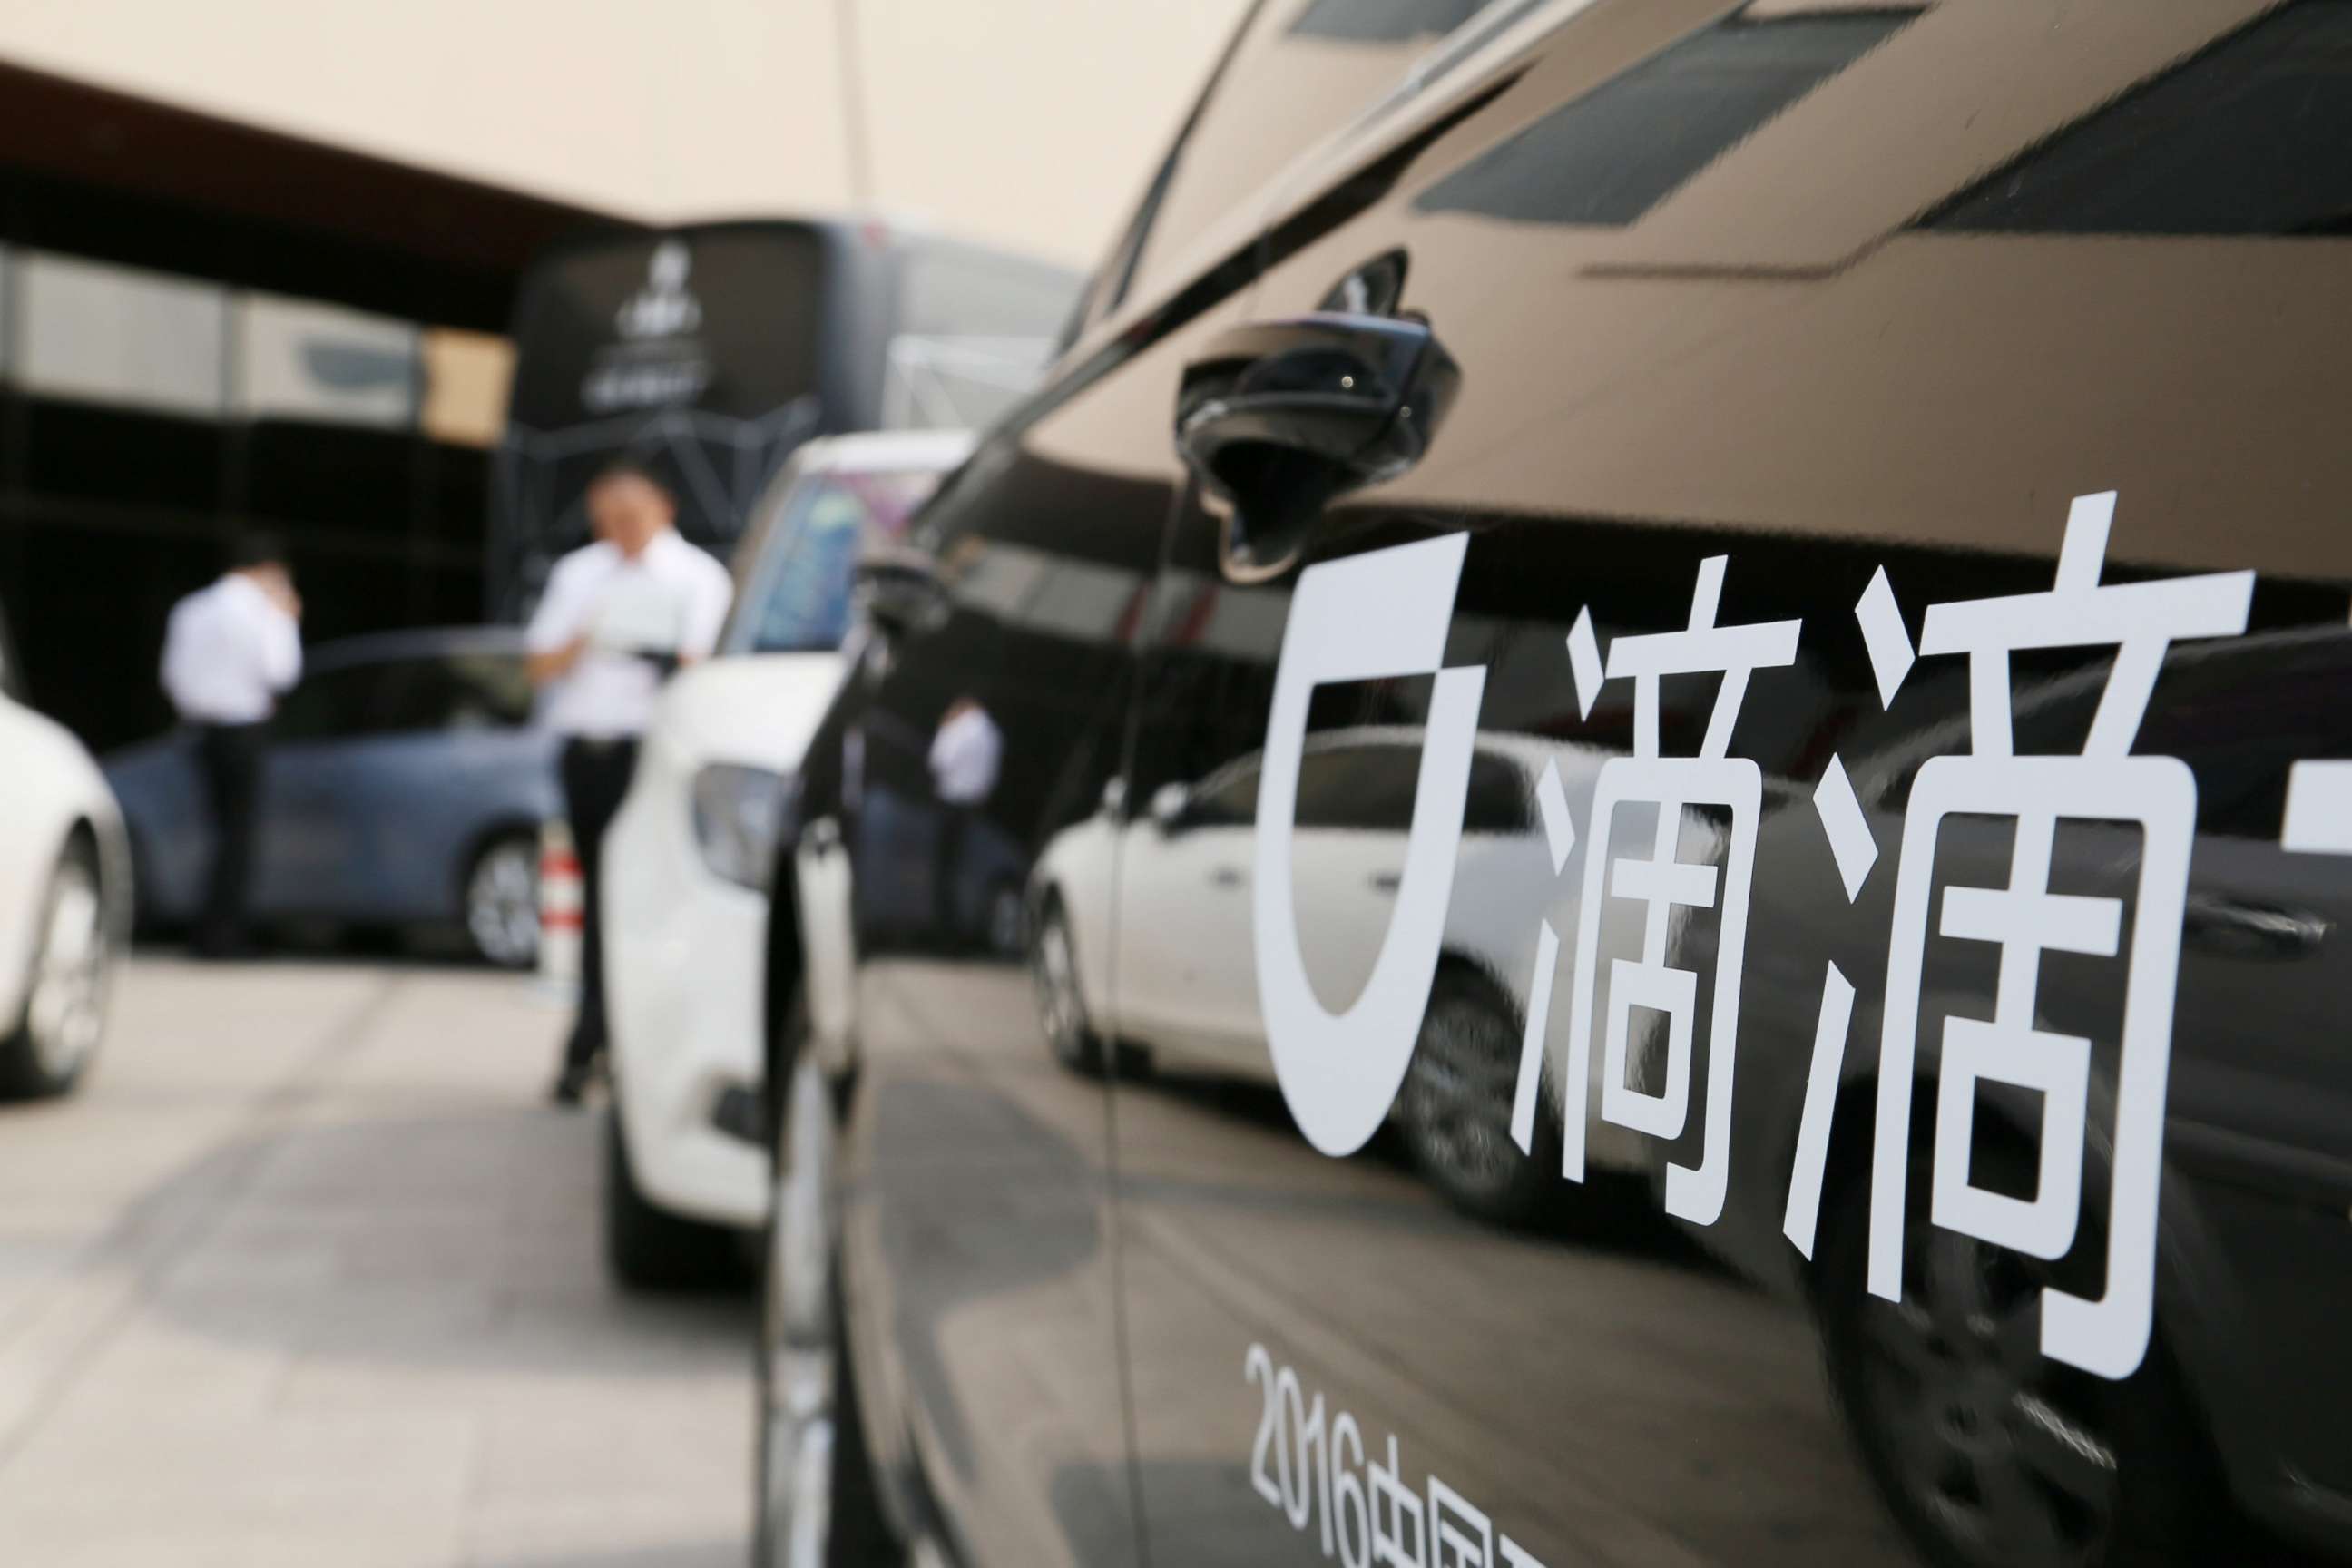 PHOTO: A Didi sign is seen on a car during the China Internet Conference in Beijing, China in this file photo, June 21, 2016.